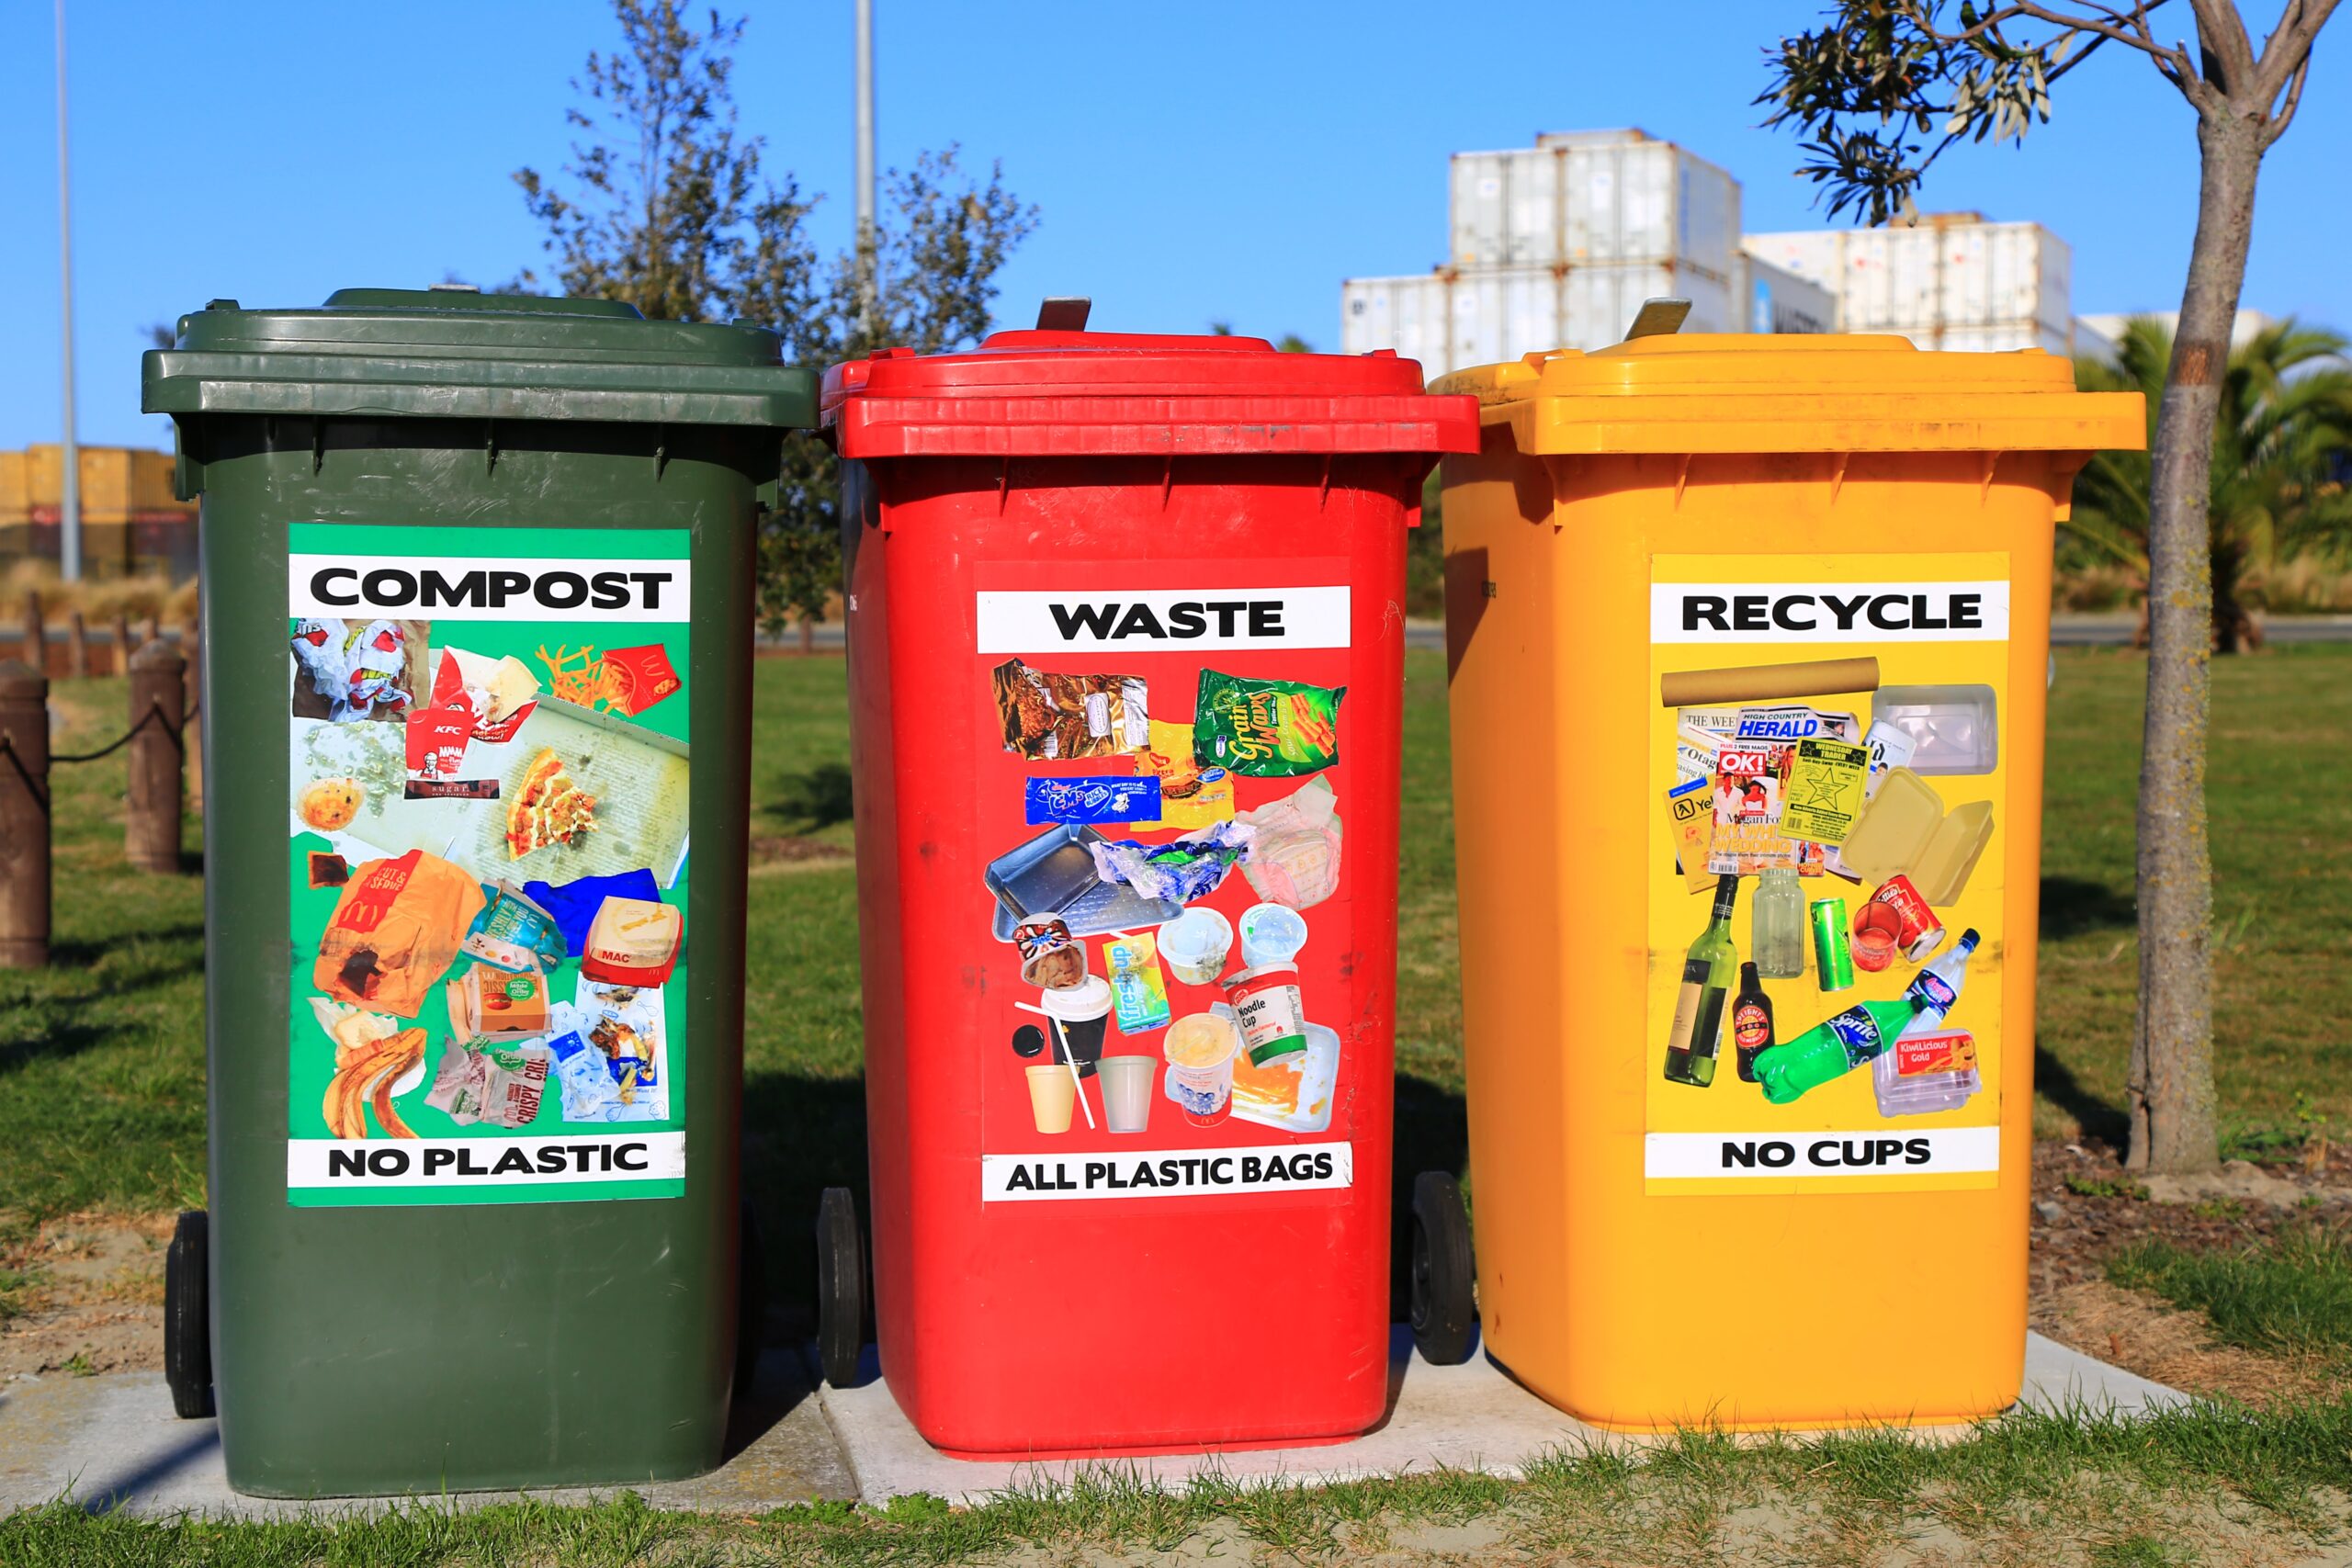 Am I respecting my spouse? Recycling is important to my spouse so I do that to respect him.